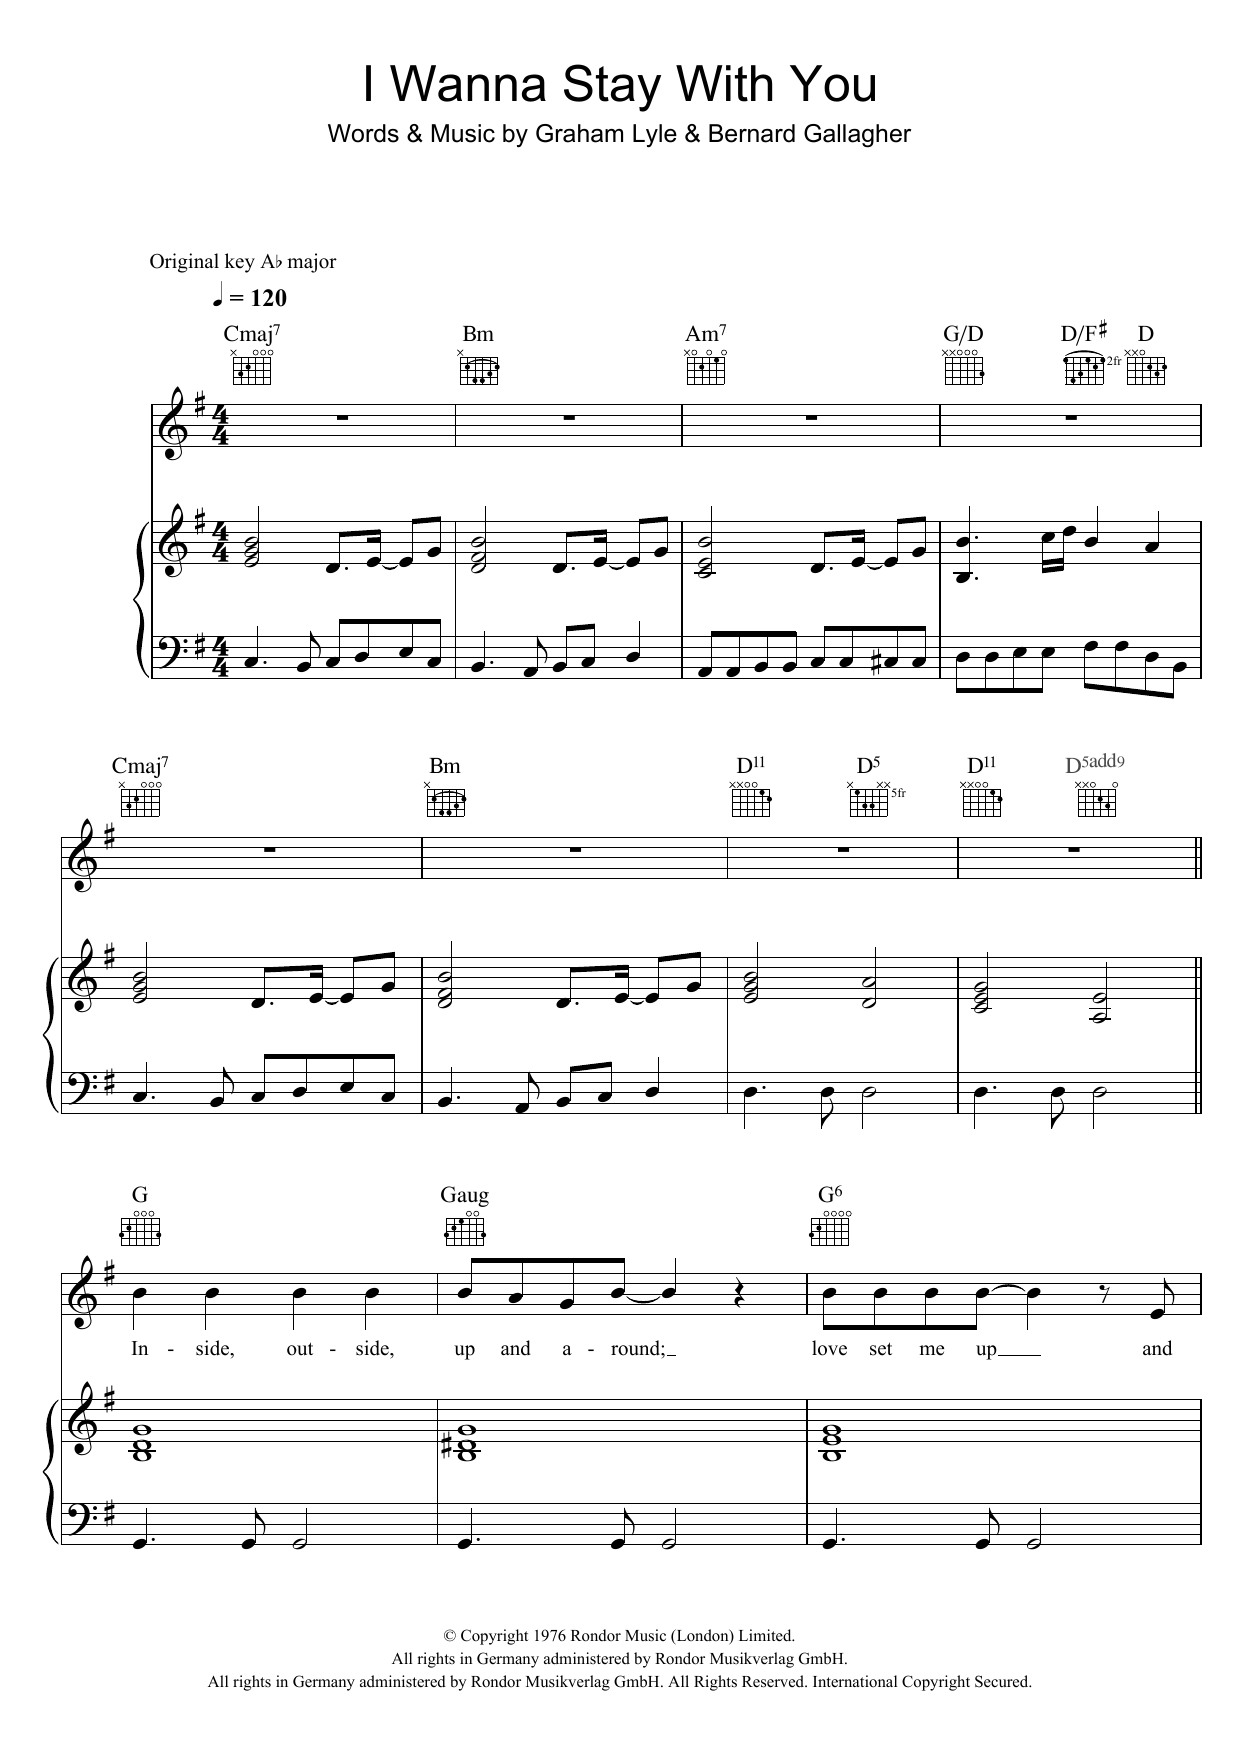 Download Gallagher & Lyle I Wanna Stay With You Sheet Music